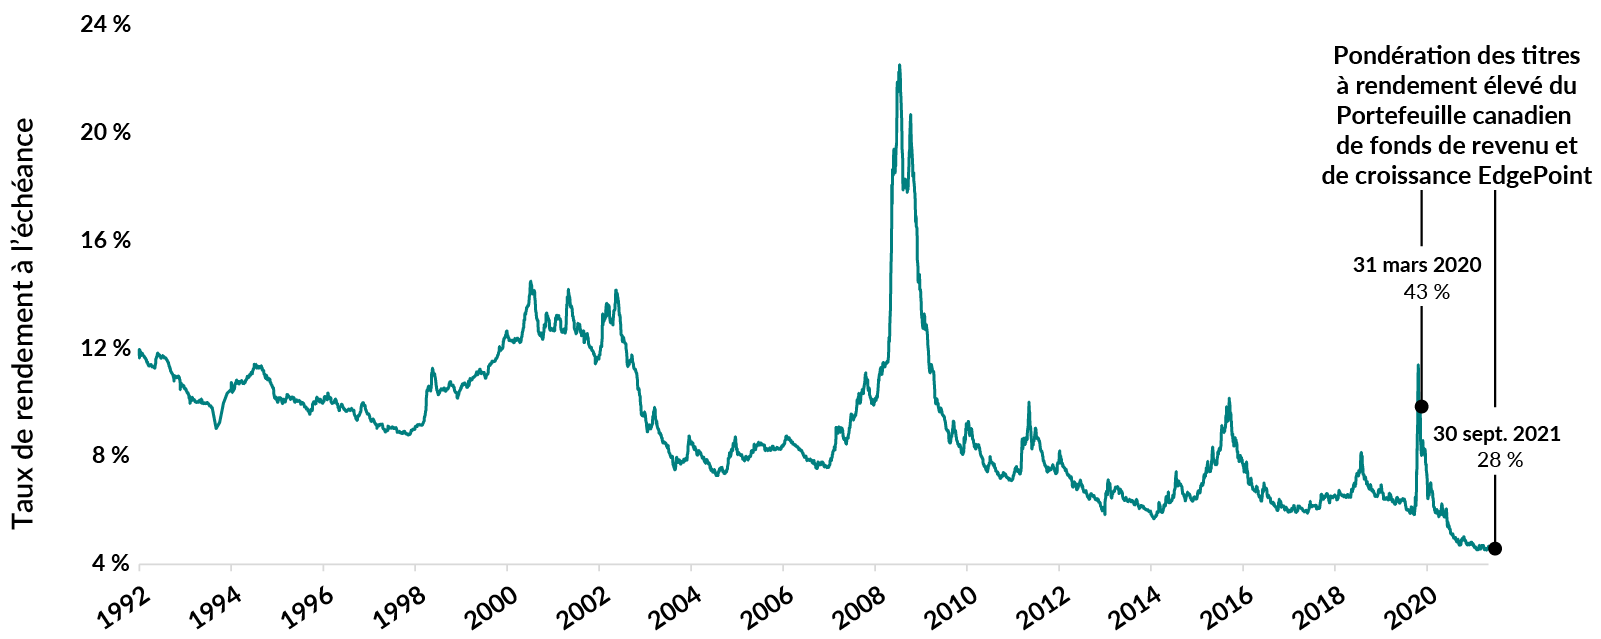 It’s interesting to observe how the allocation to high yield has trended since March 2020. It peaked at 43% and now sits at 28%, which is historically a low weight for us.  The historically low YTM for high-yield bonds was the driving force for this low allocation. The following chart shows the historical YTM for high-yield bonds. The YTM recently hit an all-time low of just over 4.5%.  In Mar. 2020, our high-yield weight was 43%, compared to 28% today.